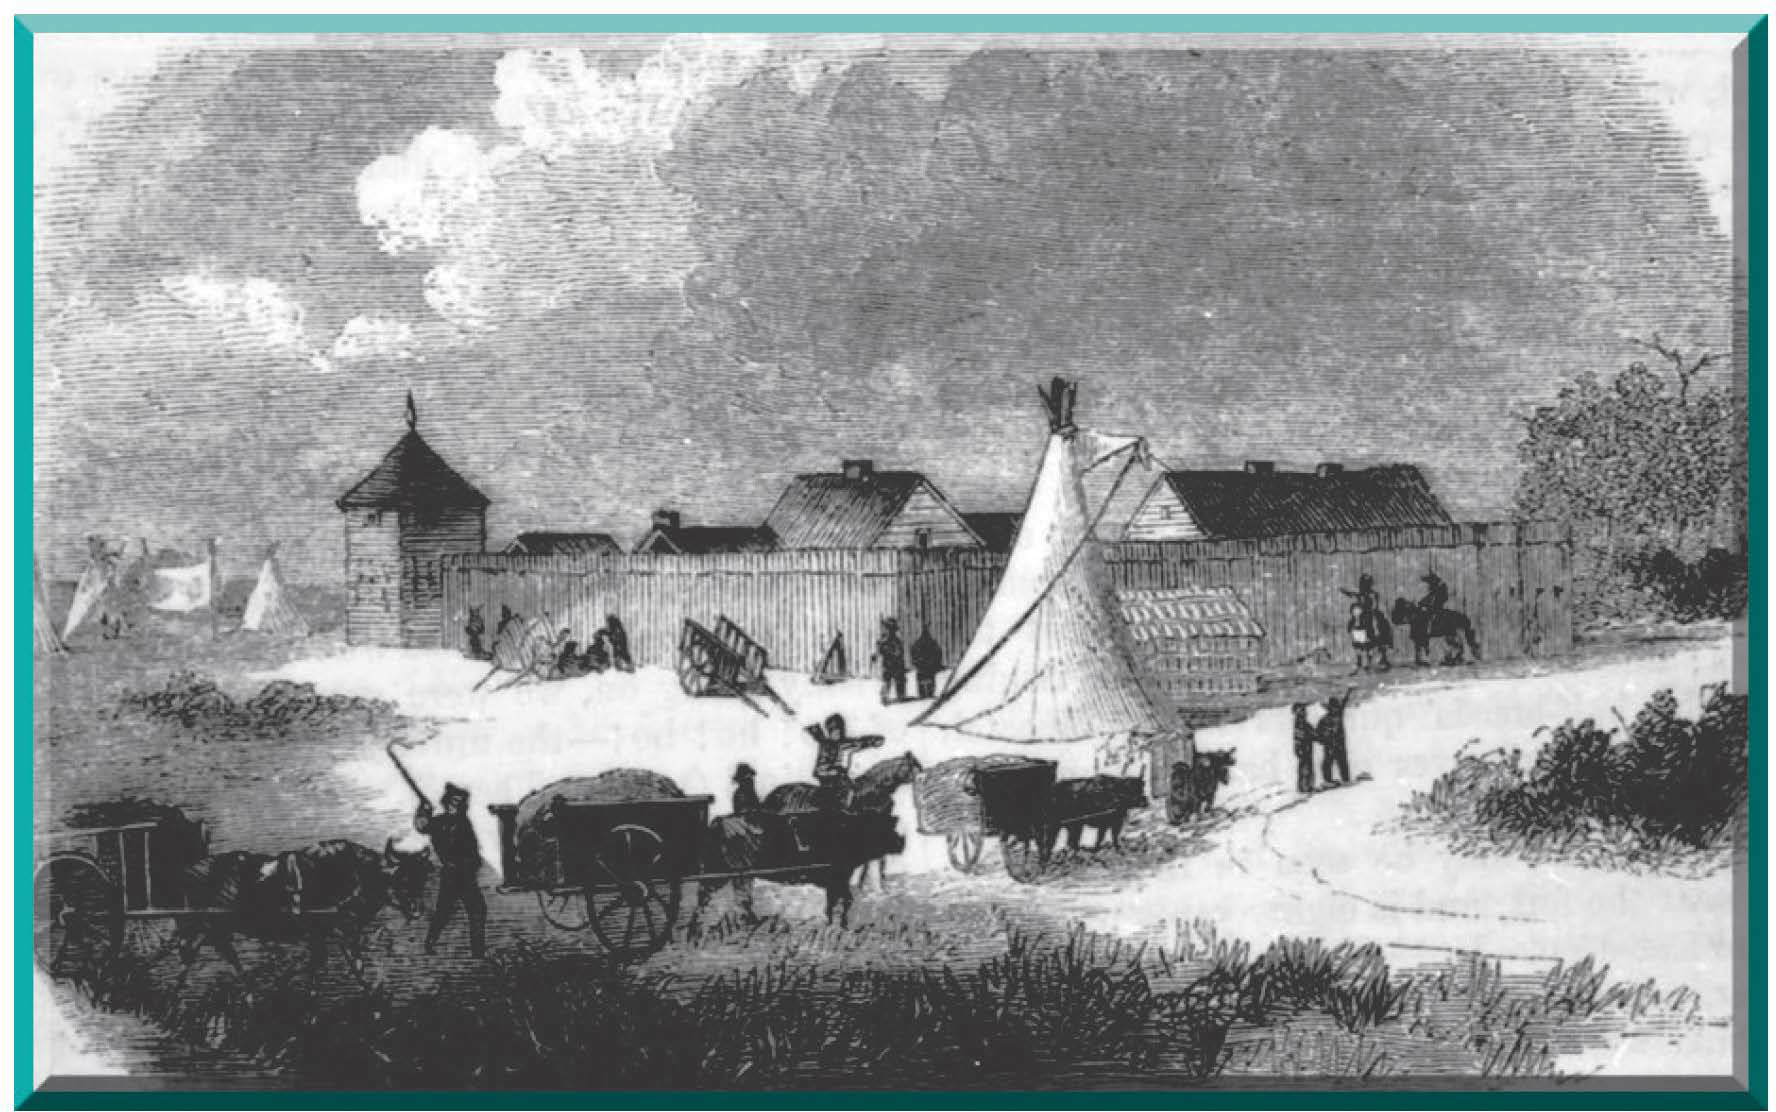 Figure 11. Built in 1870 just south of the town of Pembina, Fort Pembina